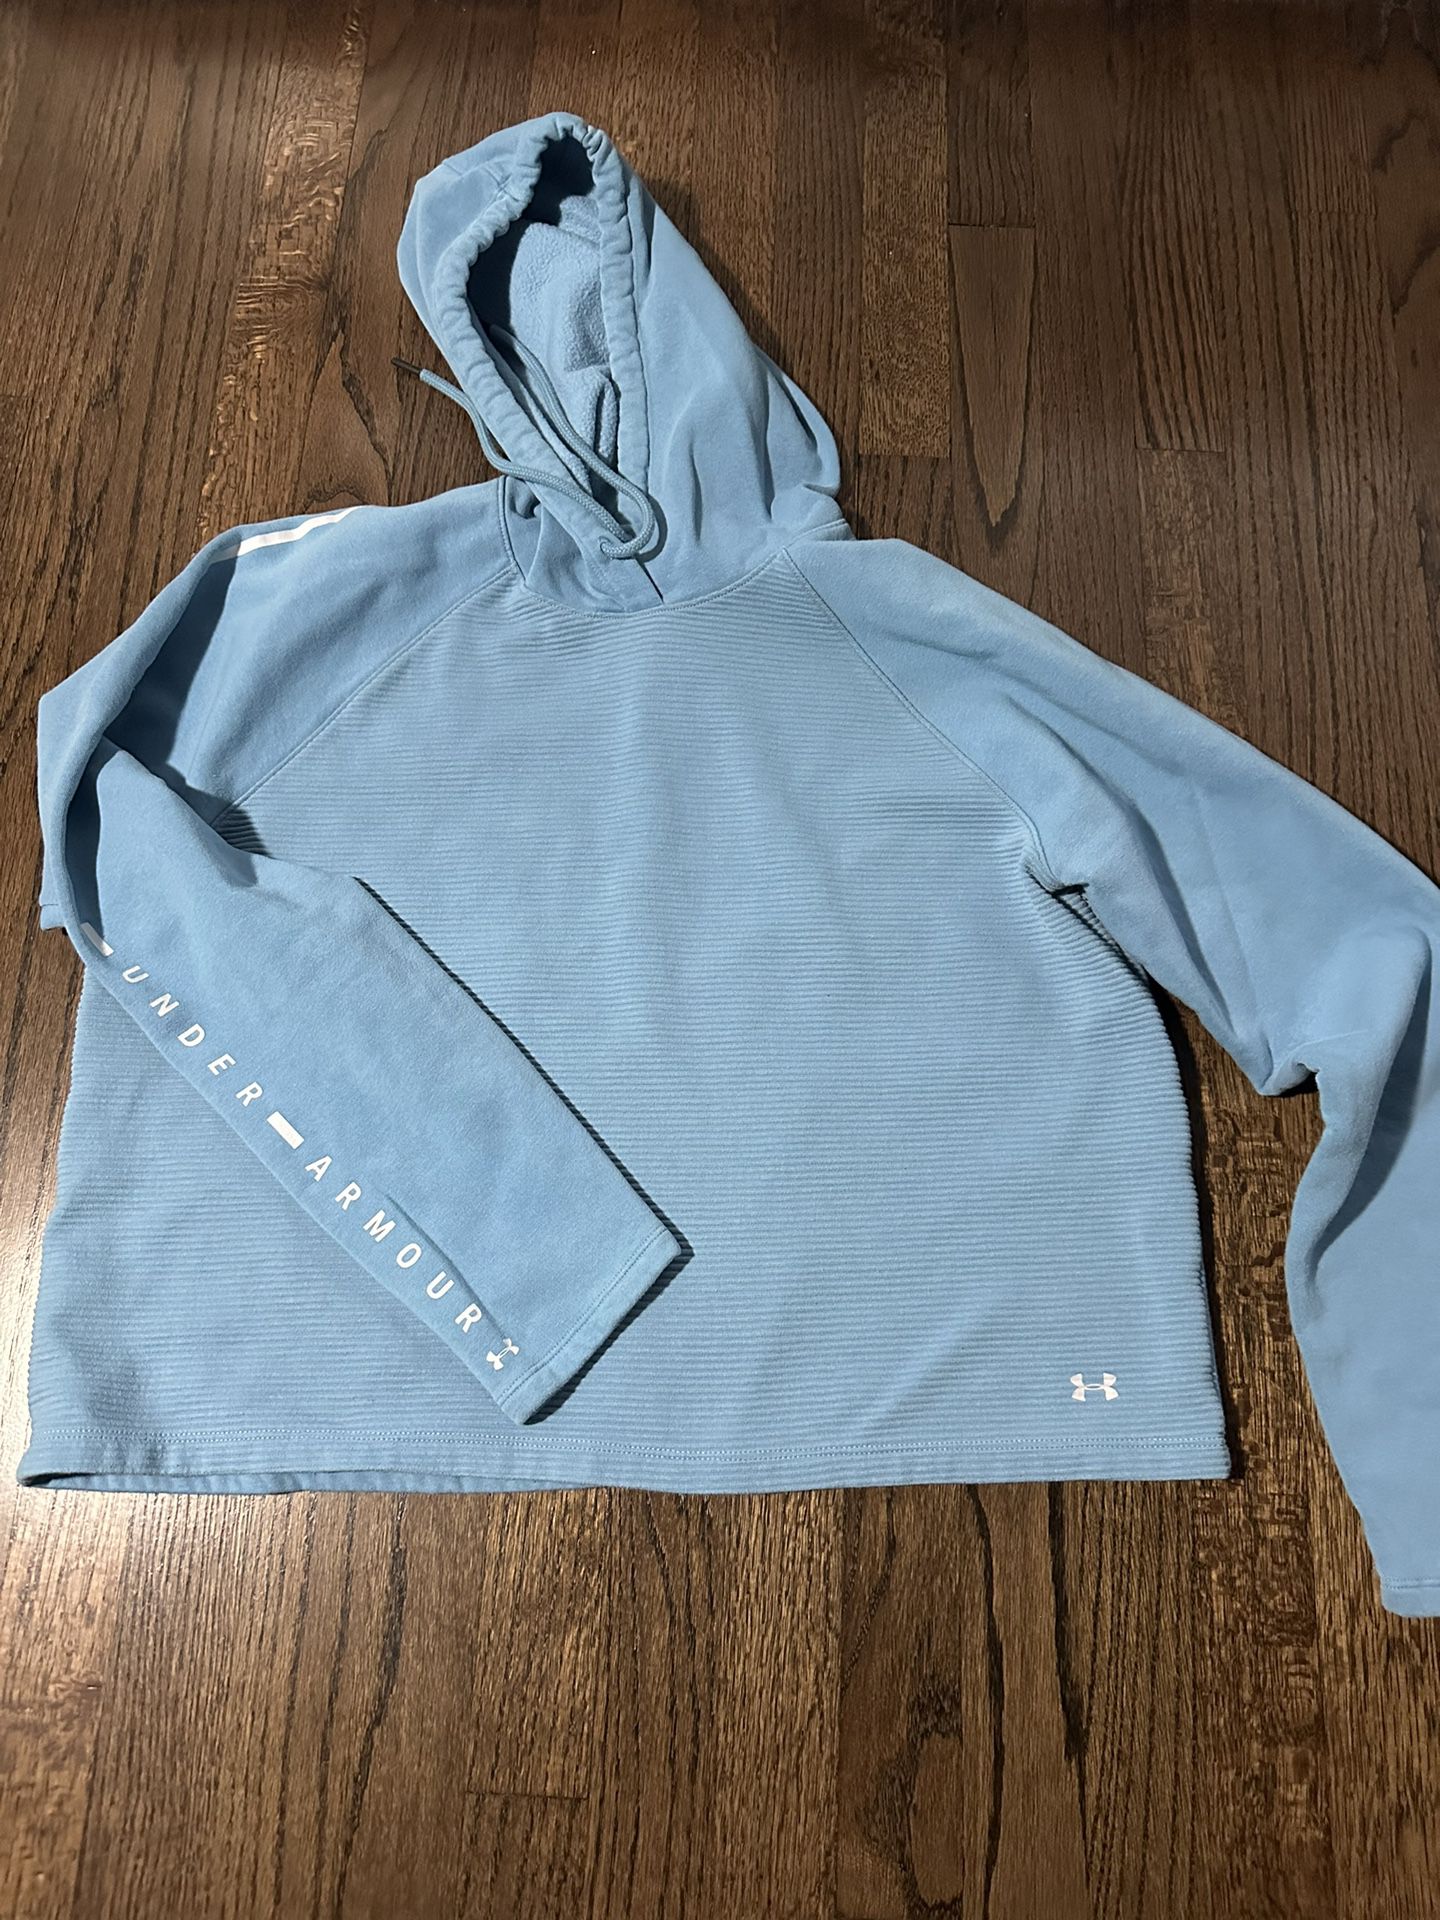 Used Women’s Pullover 